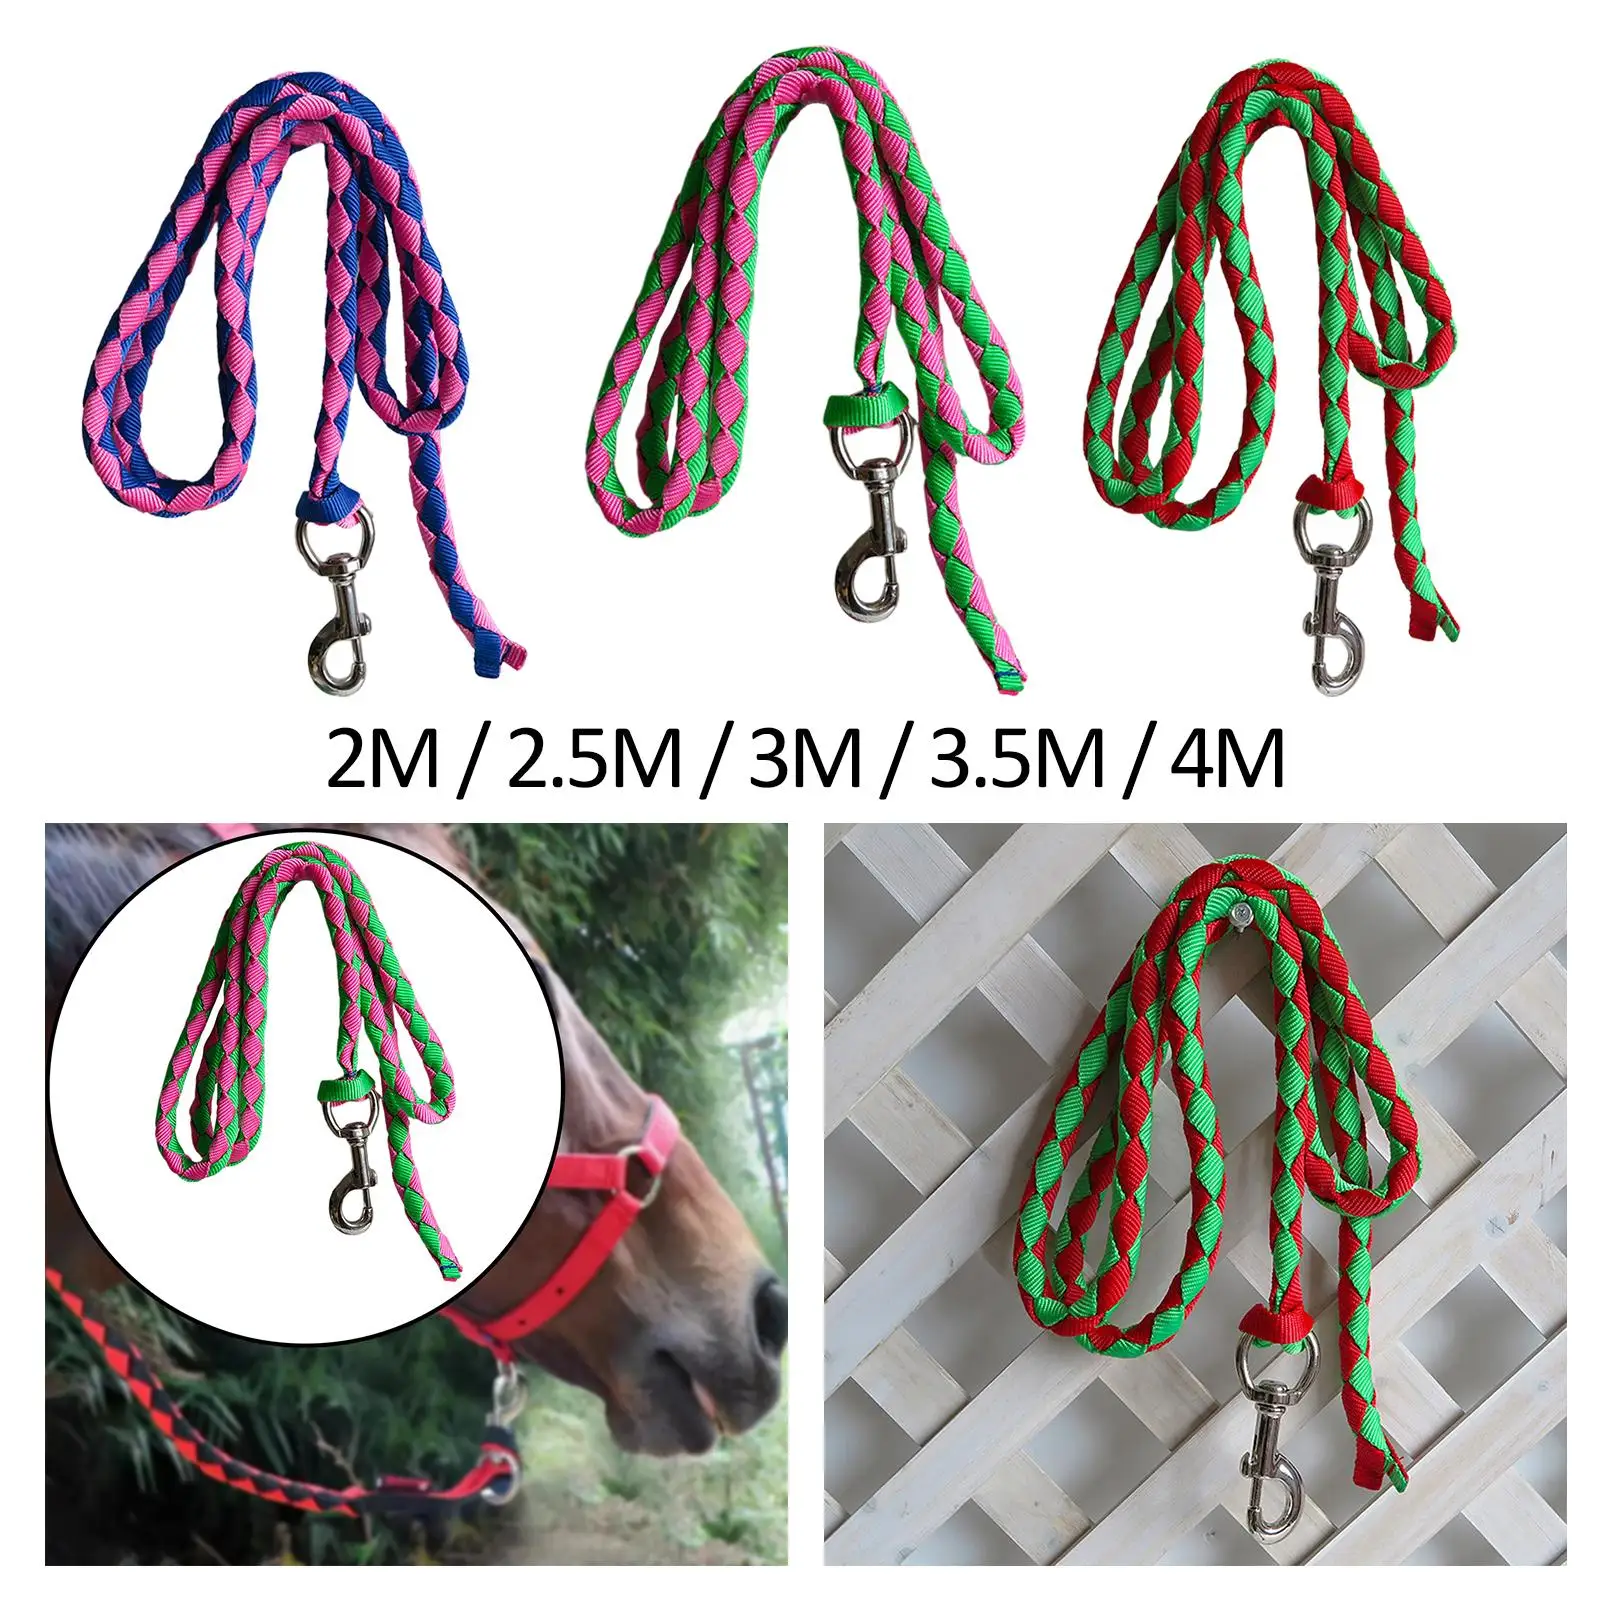 Horse Lead Rope with Bolt Snap Clip, Equestrian Lead Rope Attach to Halter or